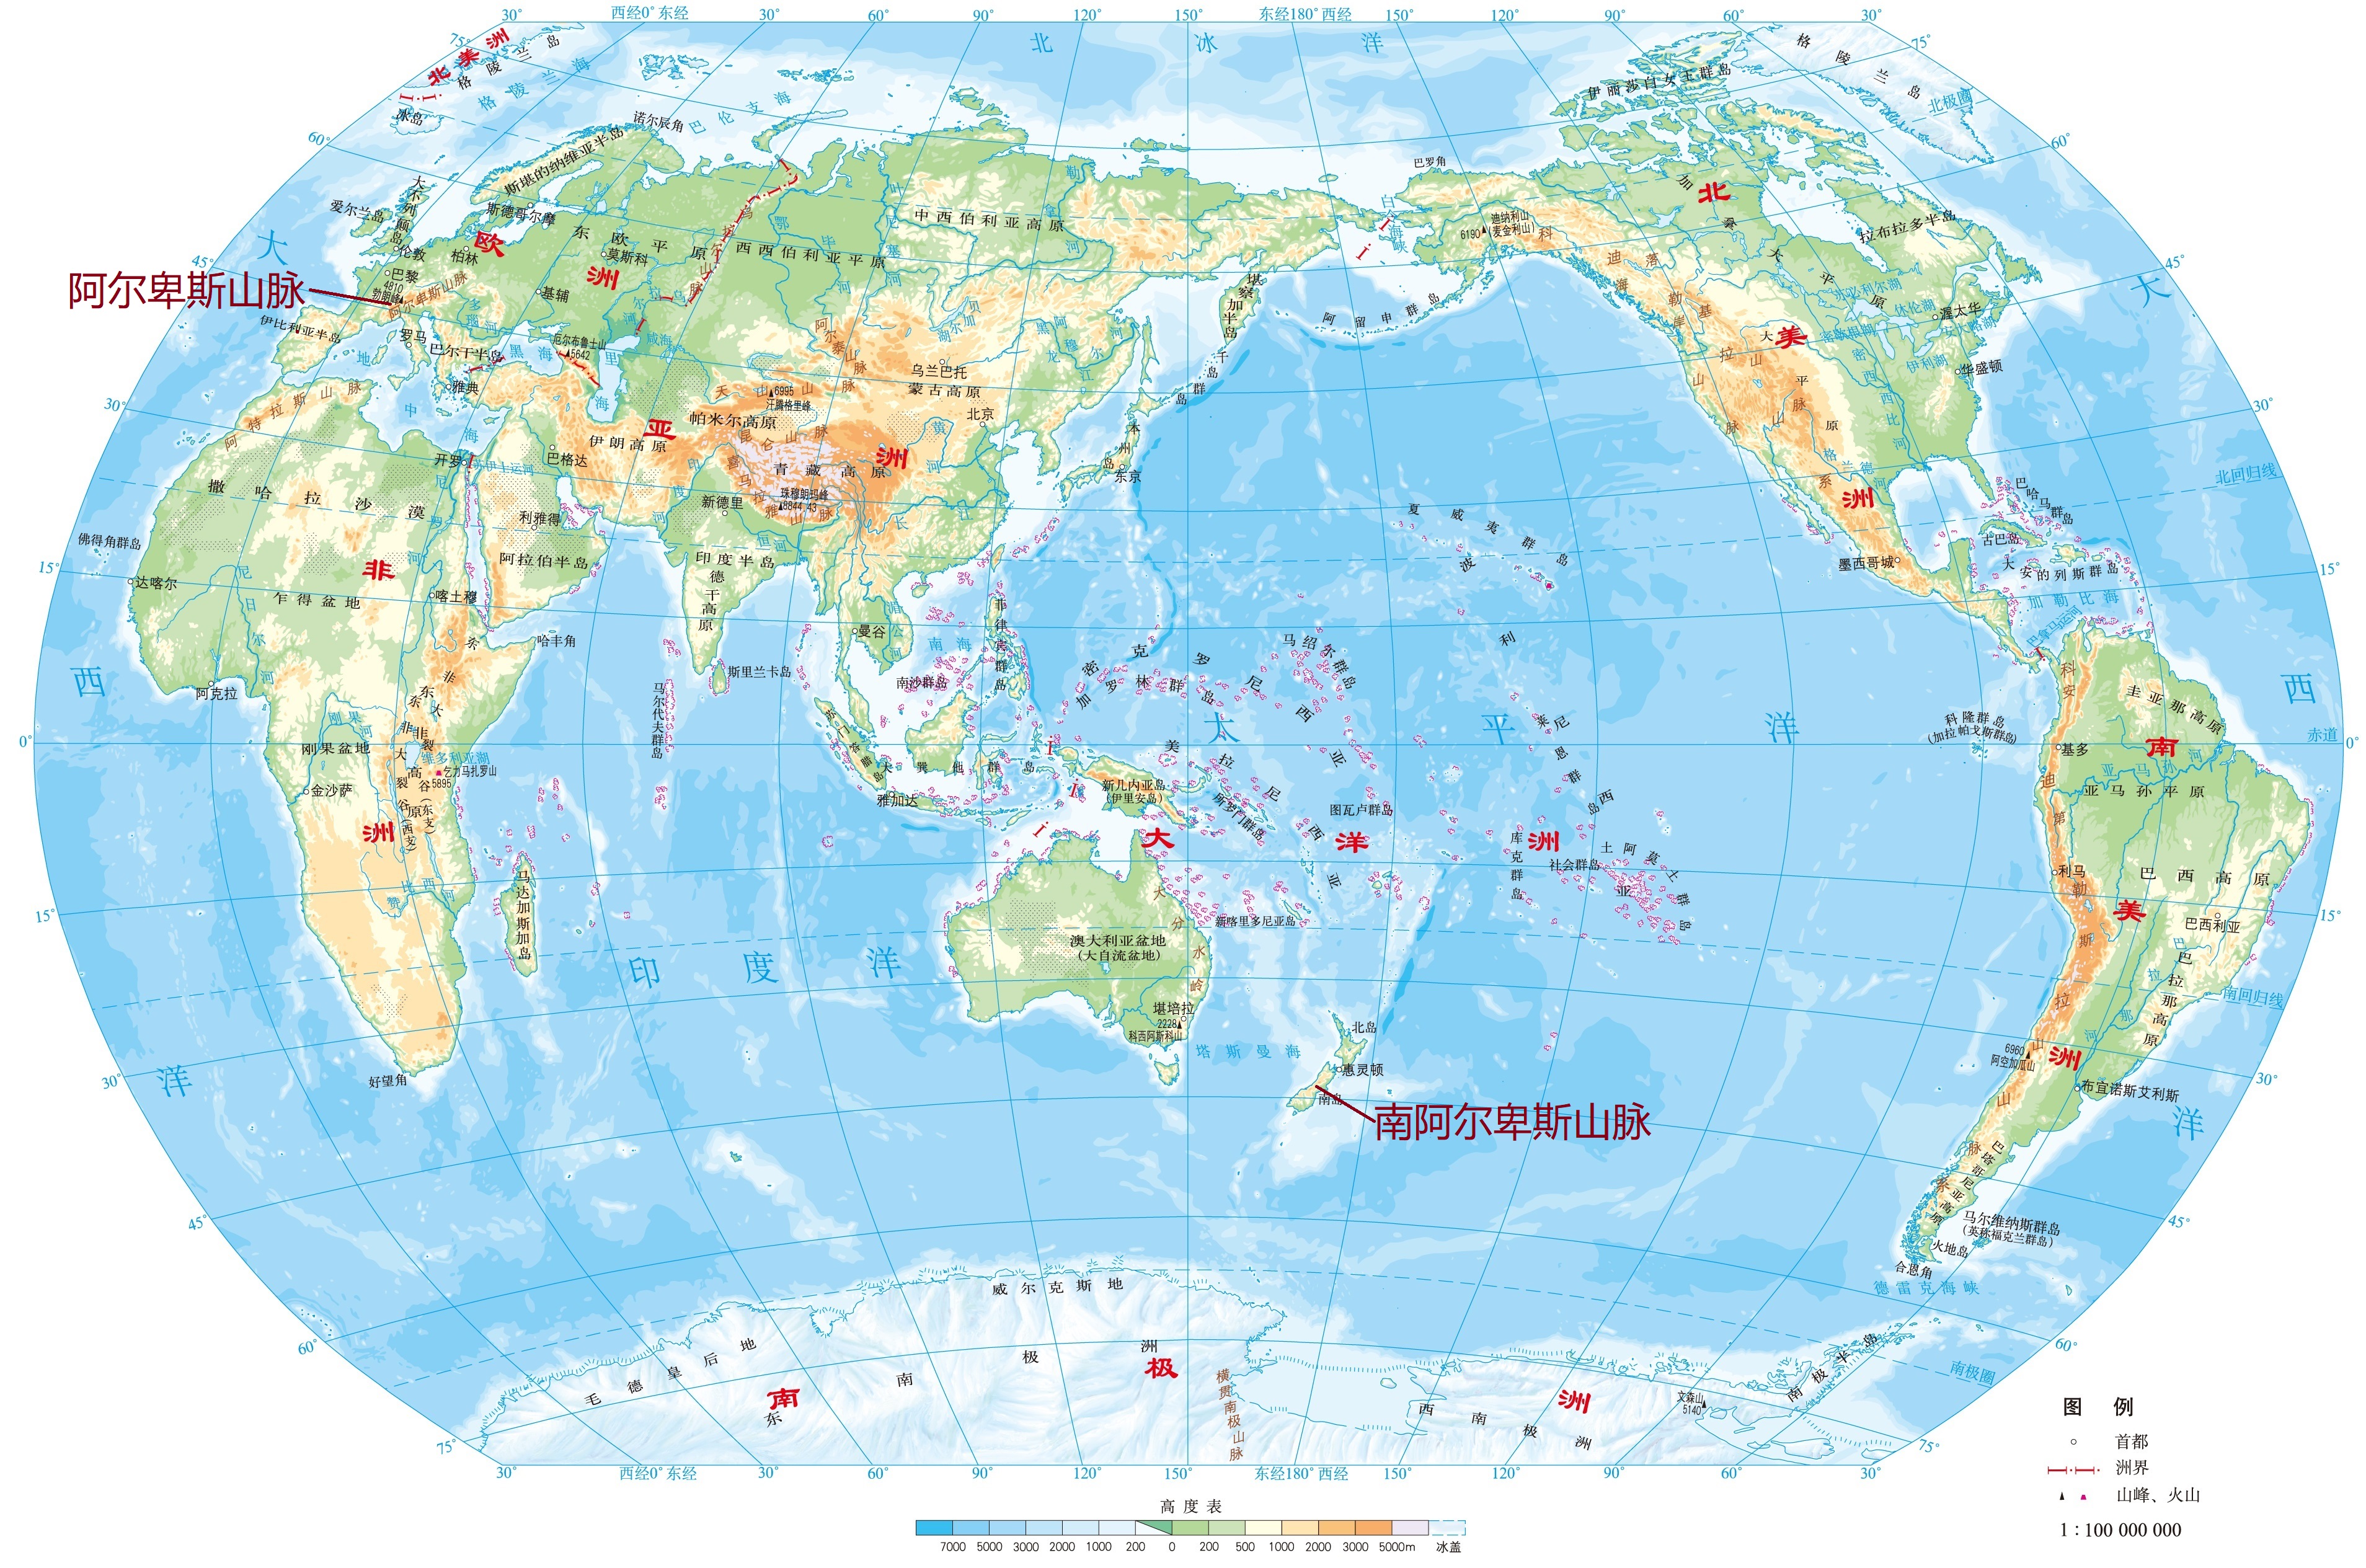 southern alps world map